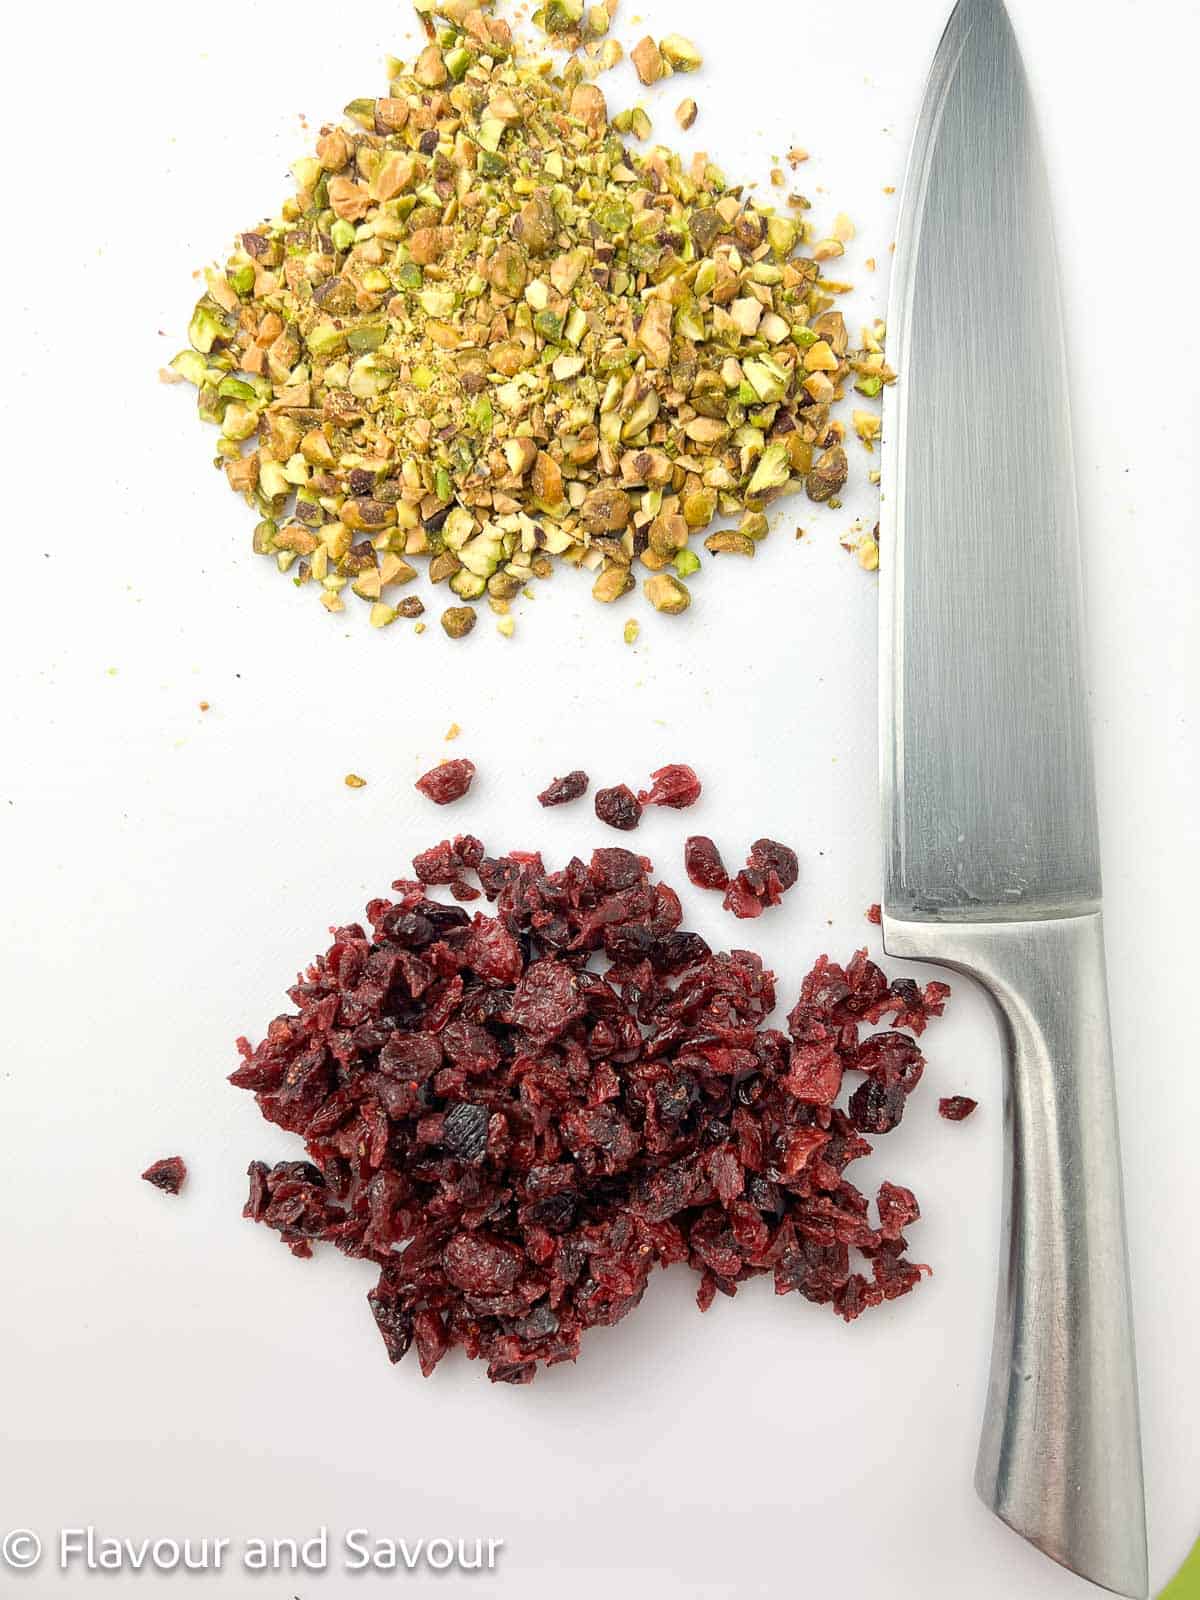 Chopped pistachios and chopped dried cranberries on a cutting board with a knife.